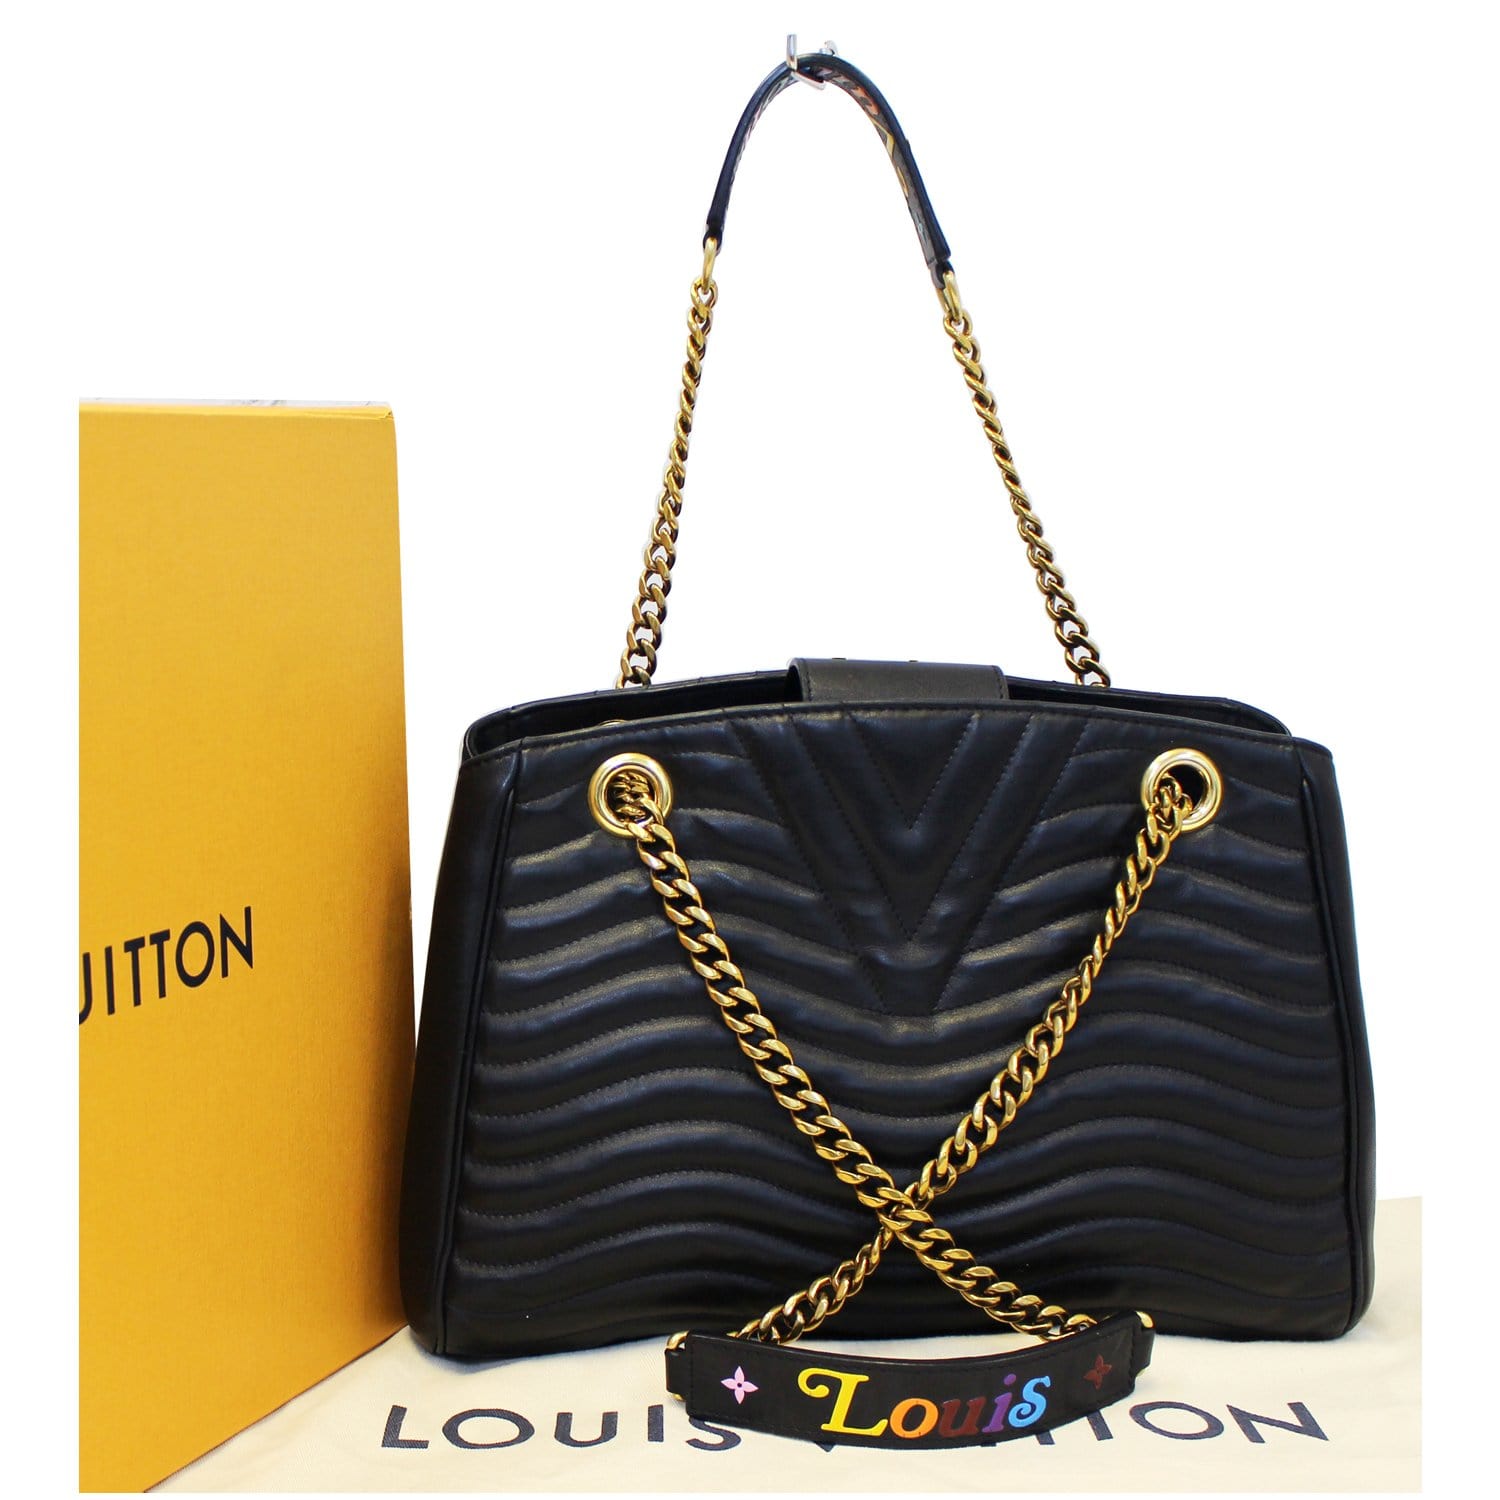 LOUIS VUITTON New Wave Chain Tote Bag Black Quilted Calfskin Leather M51496